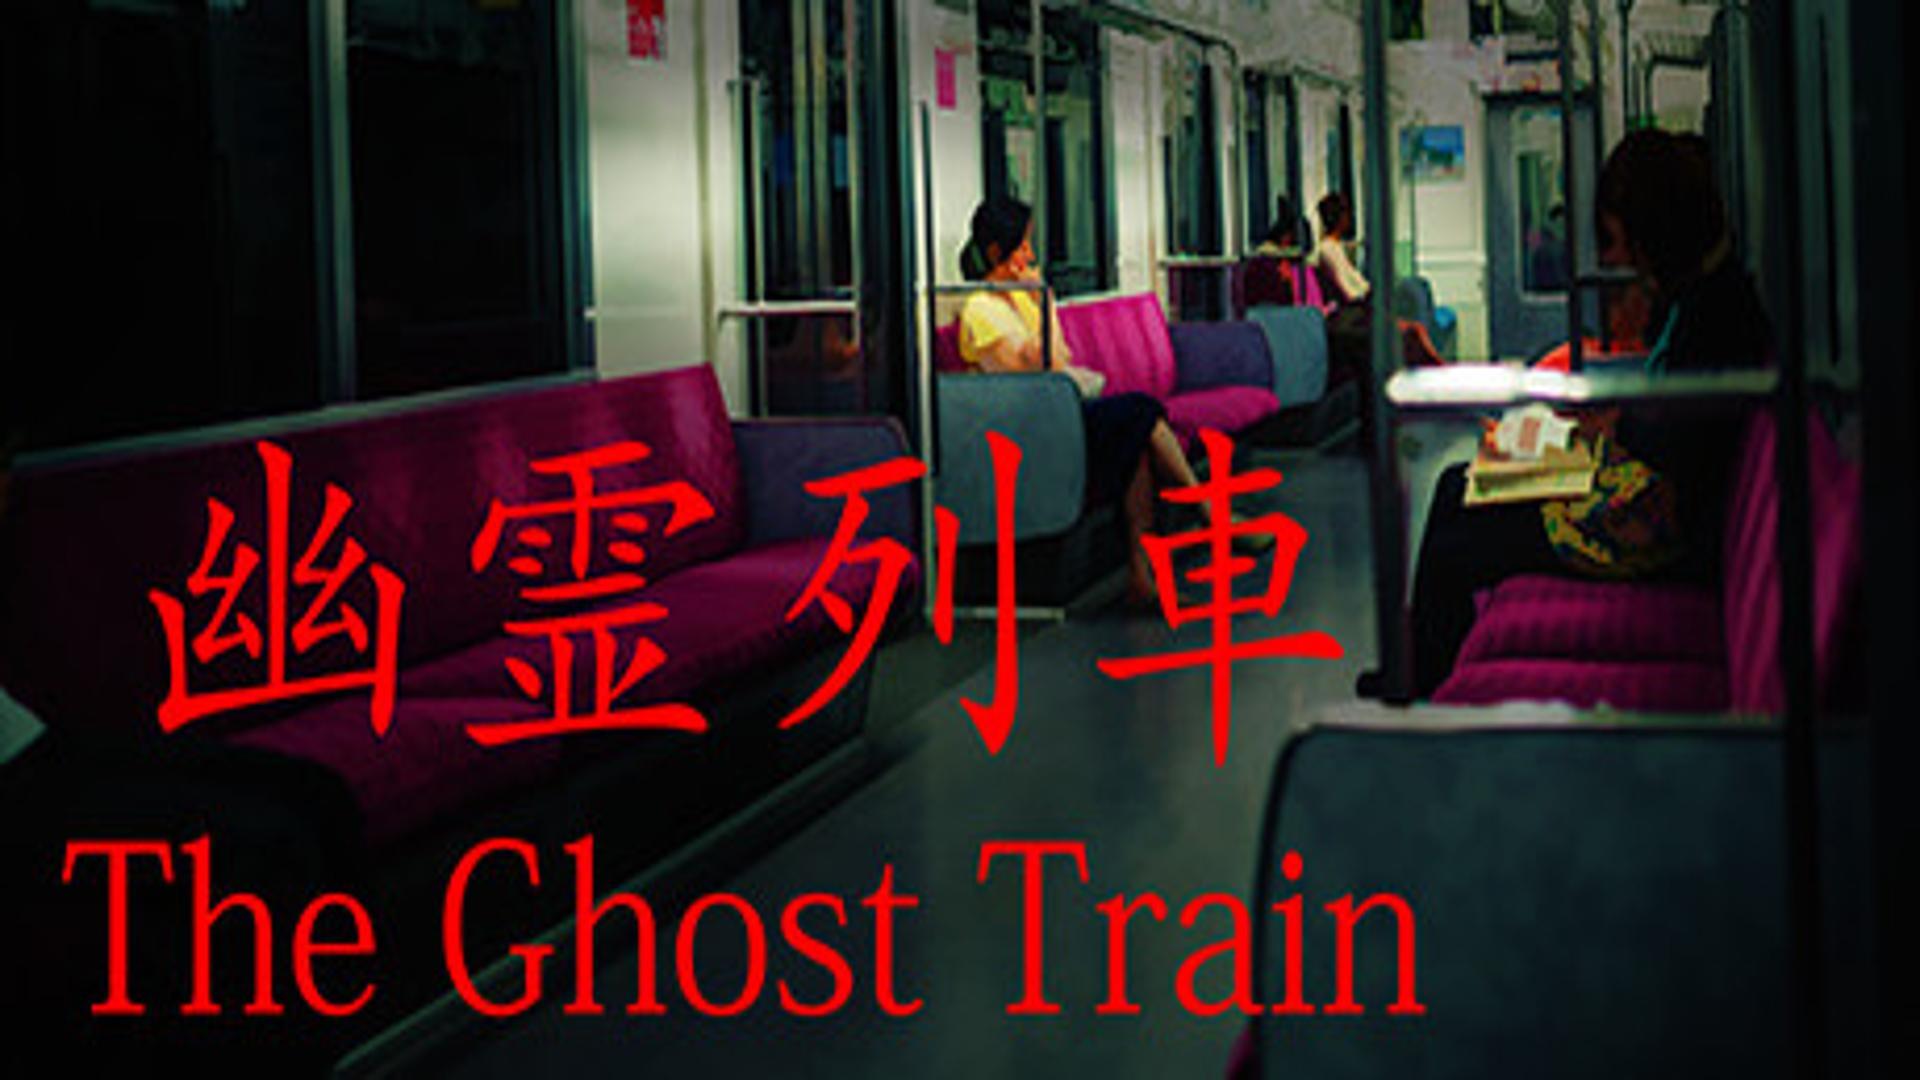 The Ghost Train | 幽霊列車- Free Download (V.1.0.2)